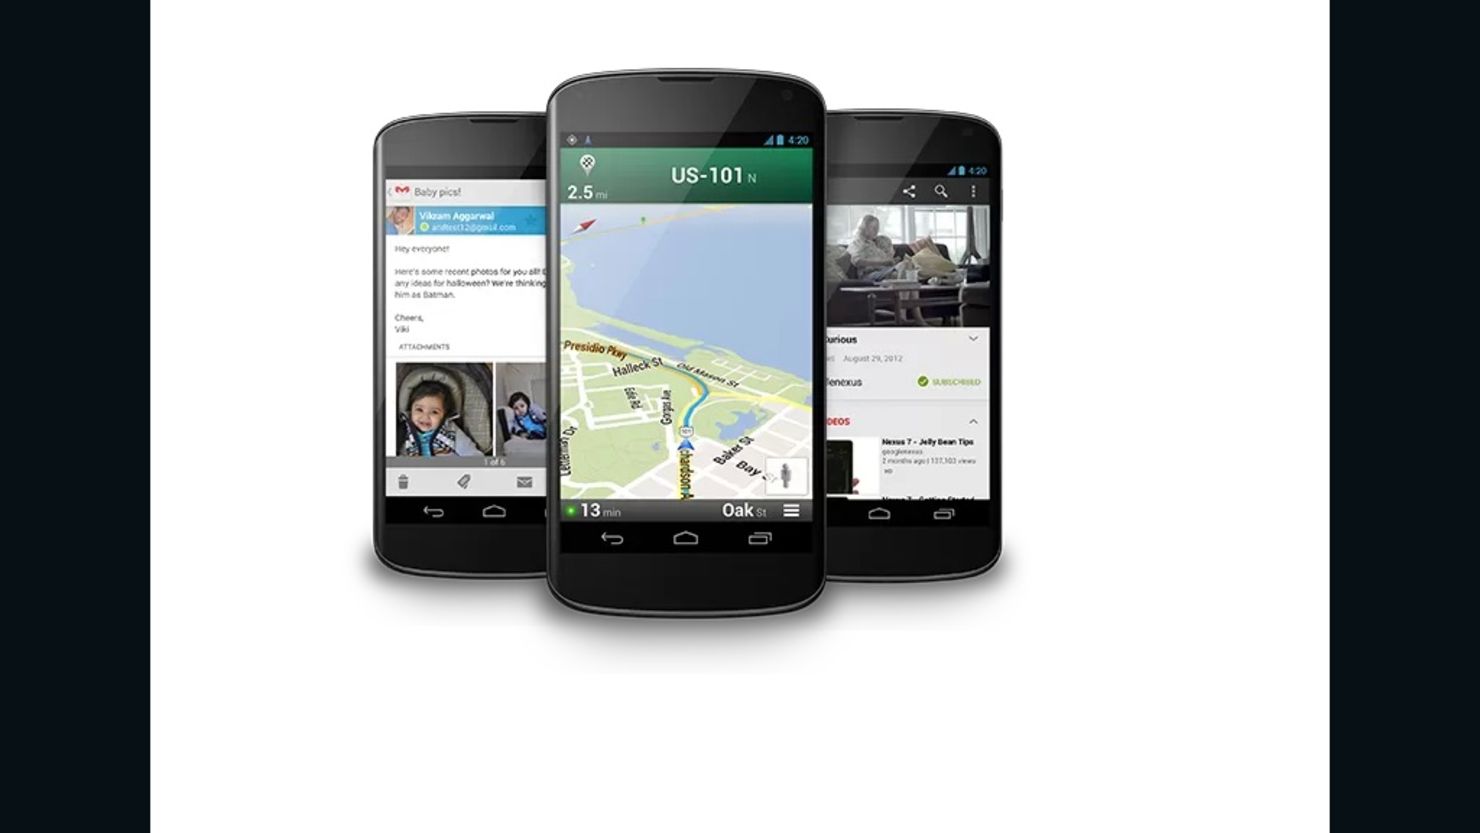 Google's price reduction on the Nexus 4 comes weeks before Apple could announce a cheaper version of the iPhone.